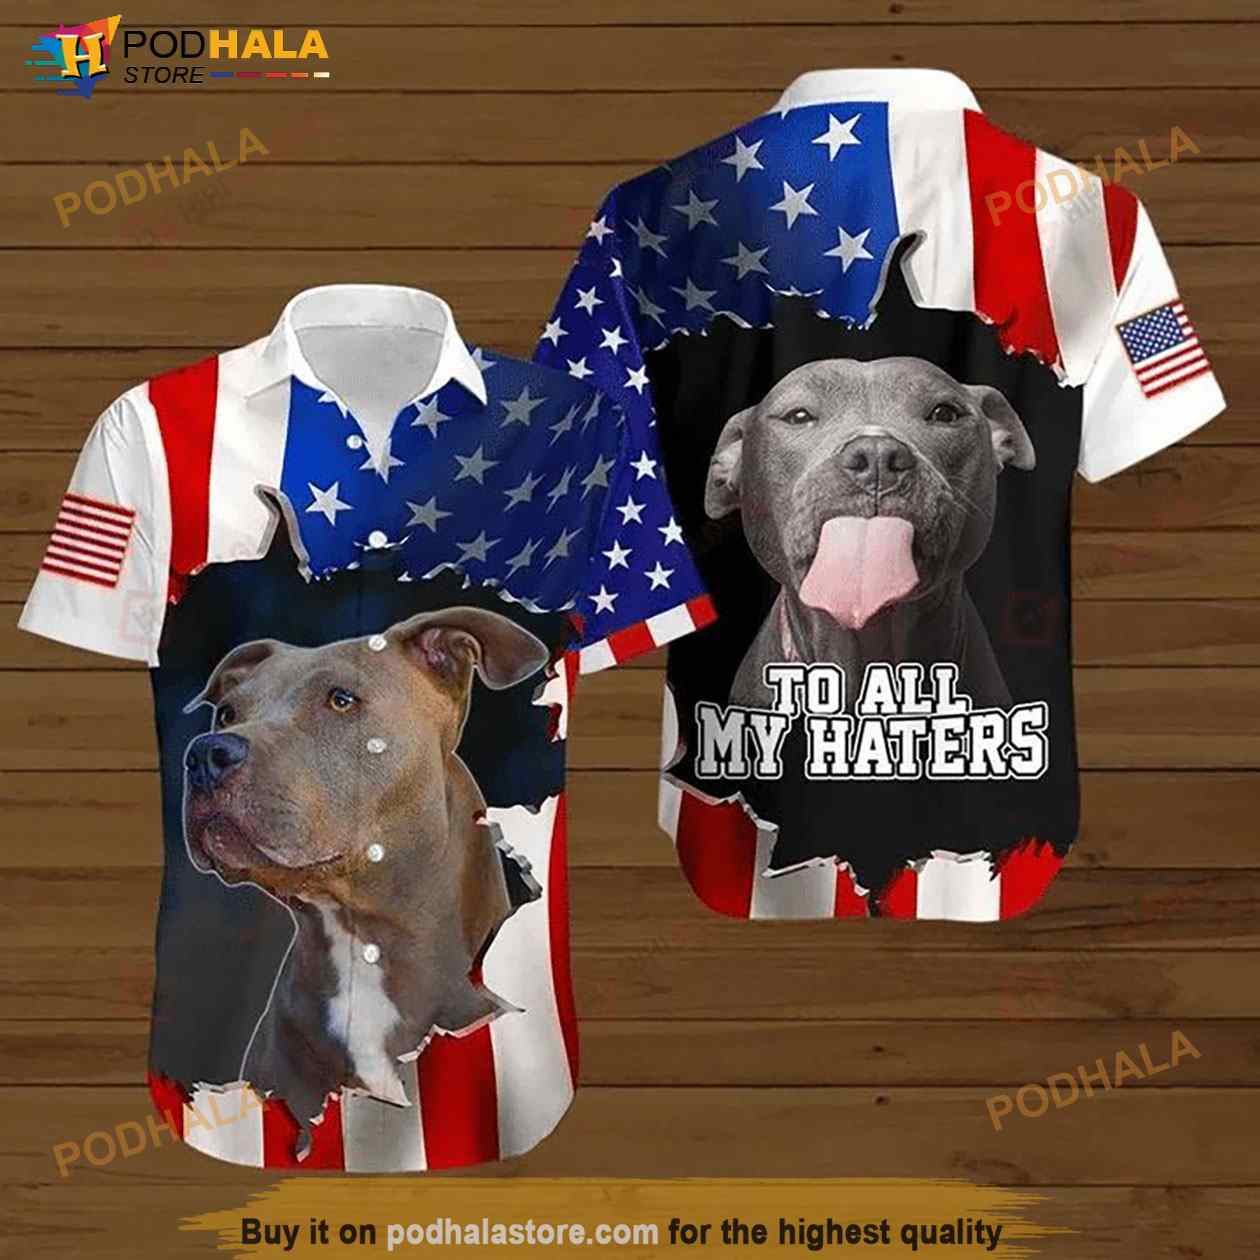 Funny Pitbull To All My Haters Shirts, Pitbull Dog Lover Gifts for Women Men